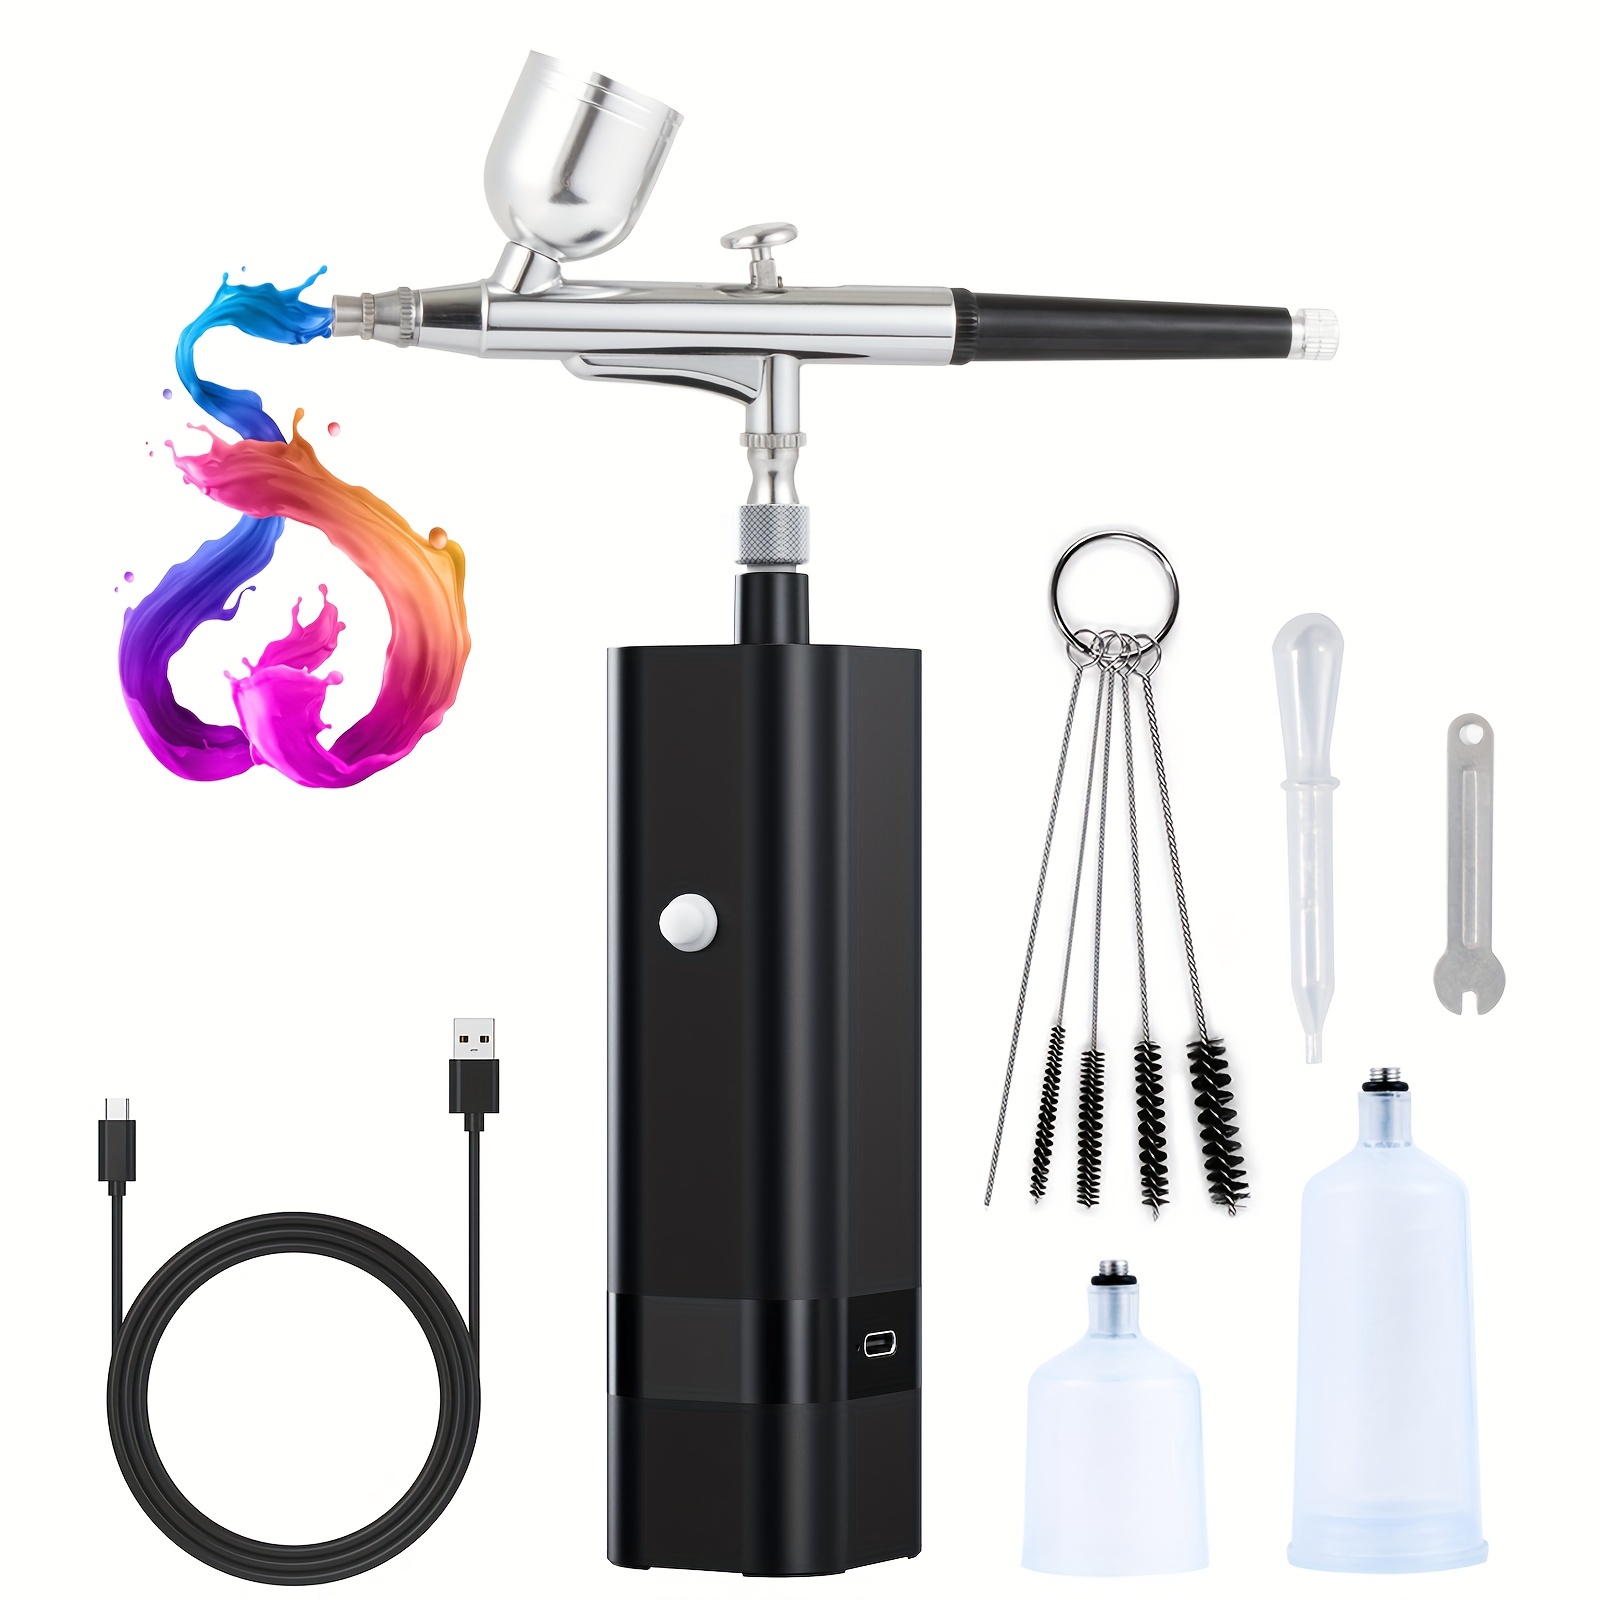 Cordless Airbrush Kit with Compressor, 32PSI Rechargeable Air Brush Gun Kit